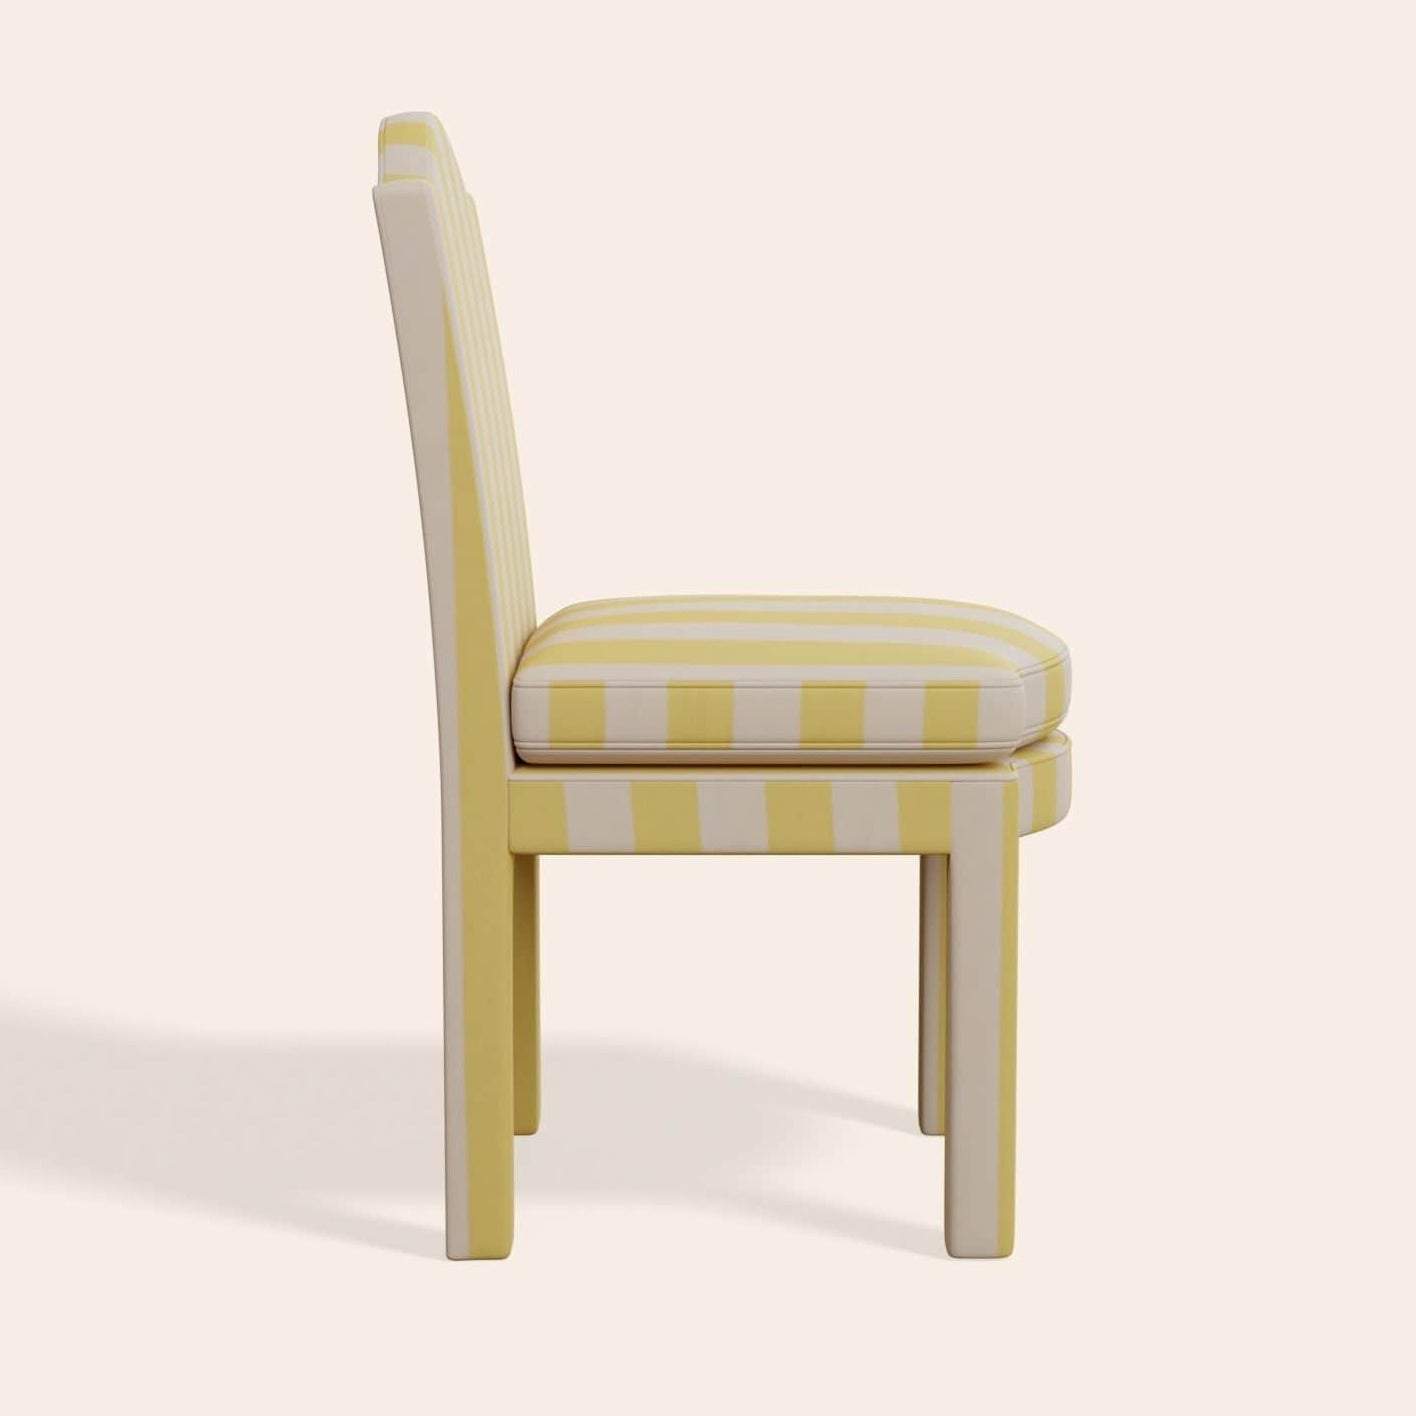 Pair of Leo Dining Chairs, Citron